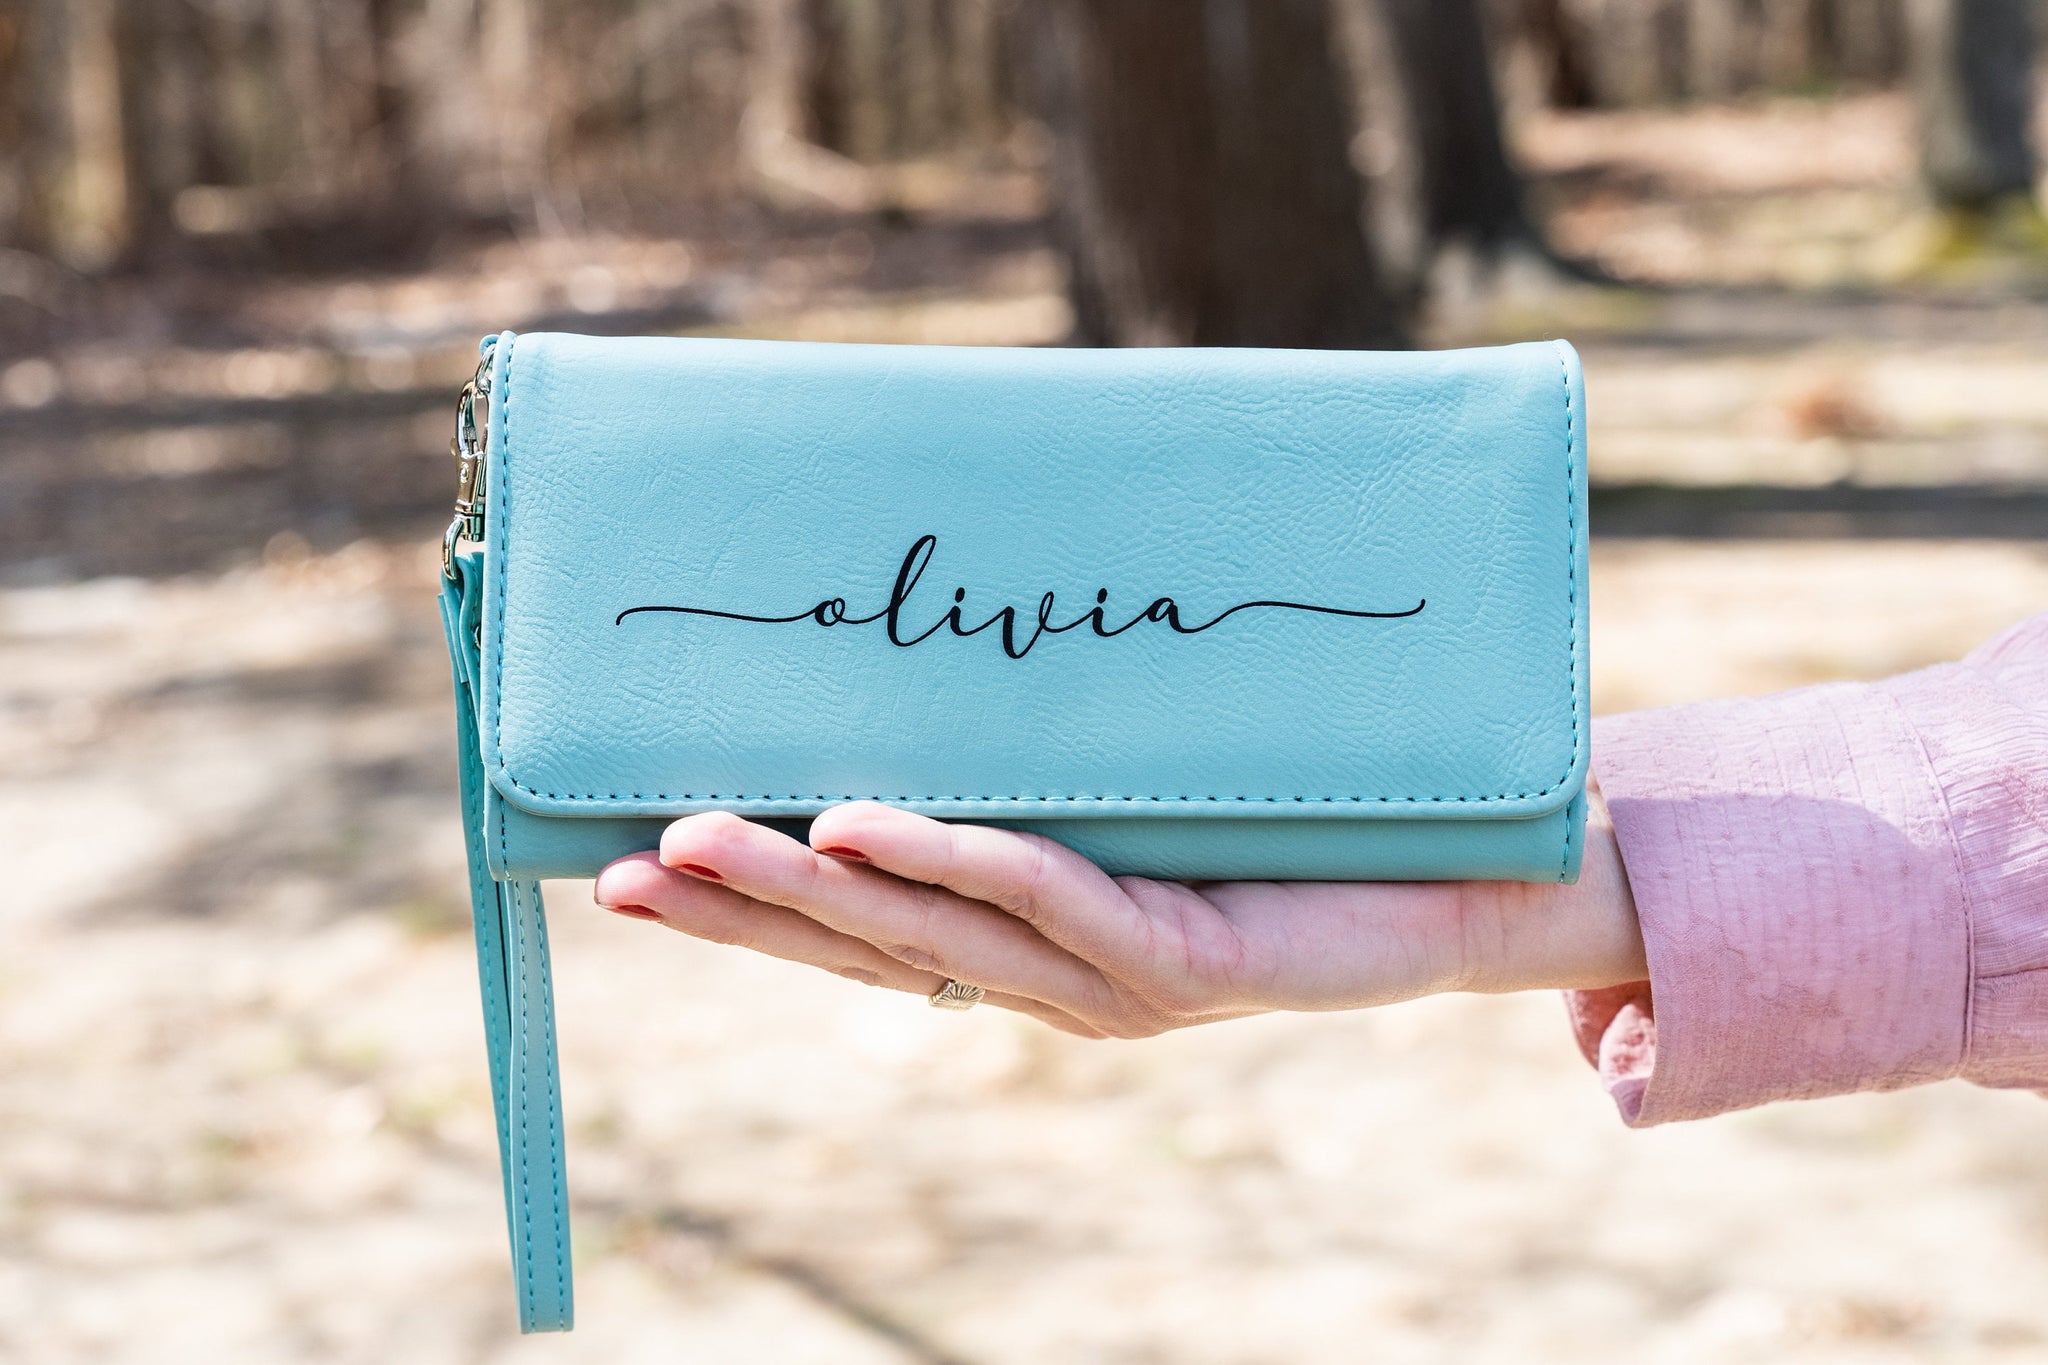 Stella Women's Wallet, Vegan Leather Wallet, Personalized Gifts for Her, Custom Engraved Purse